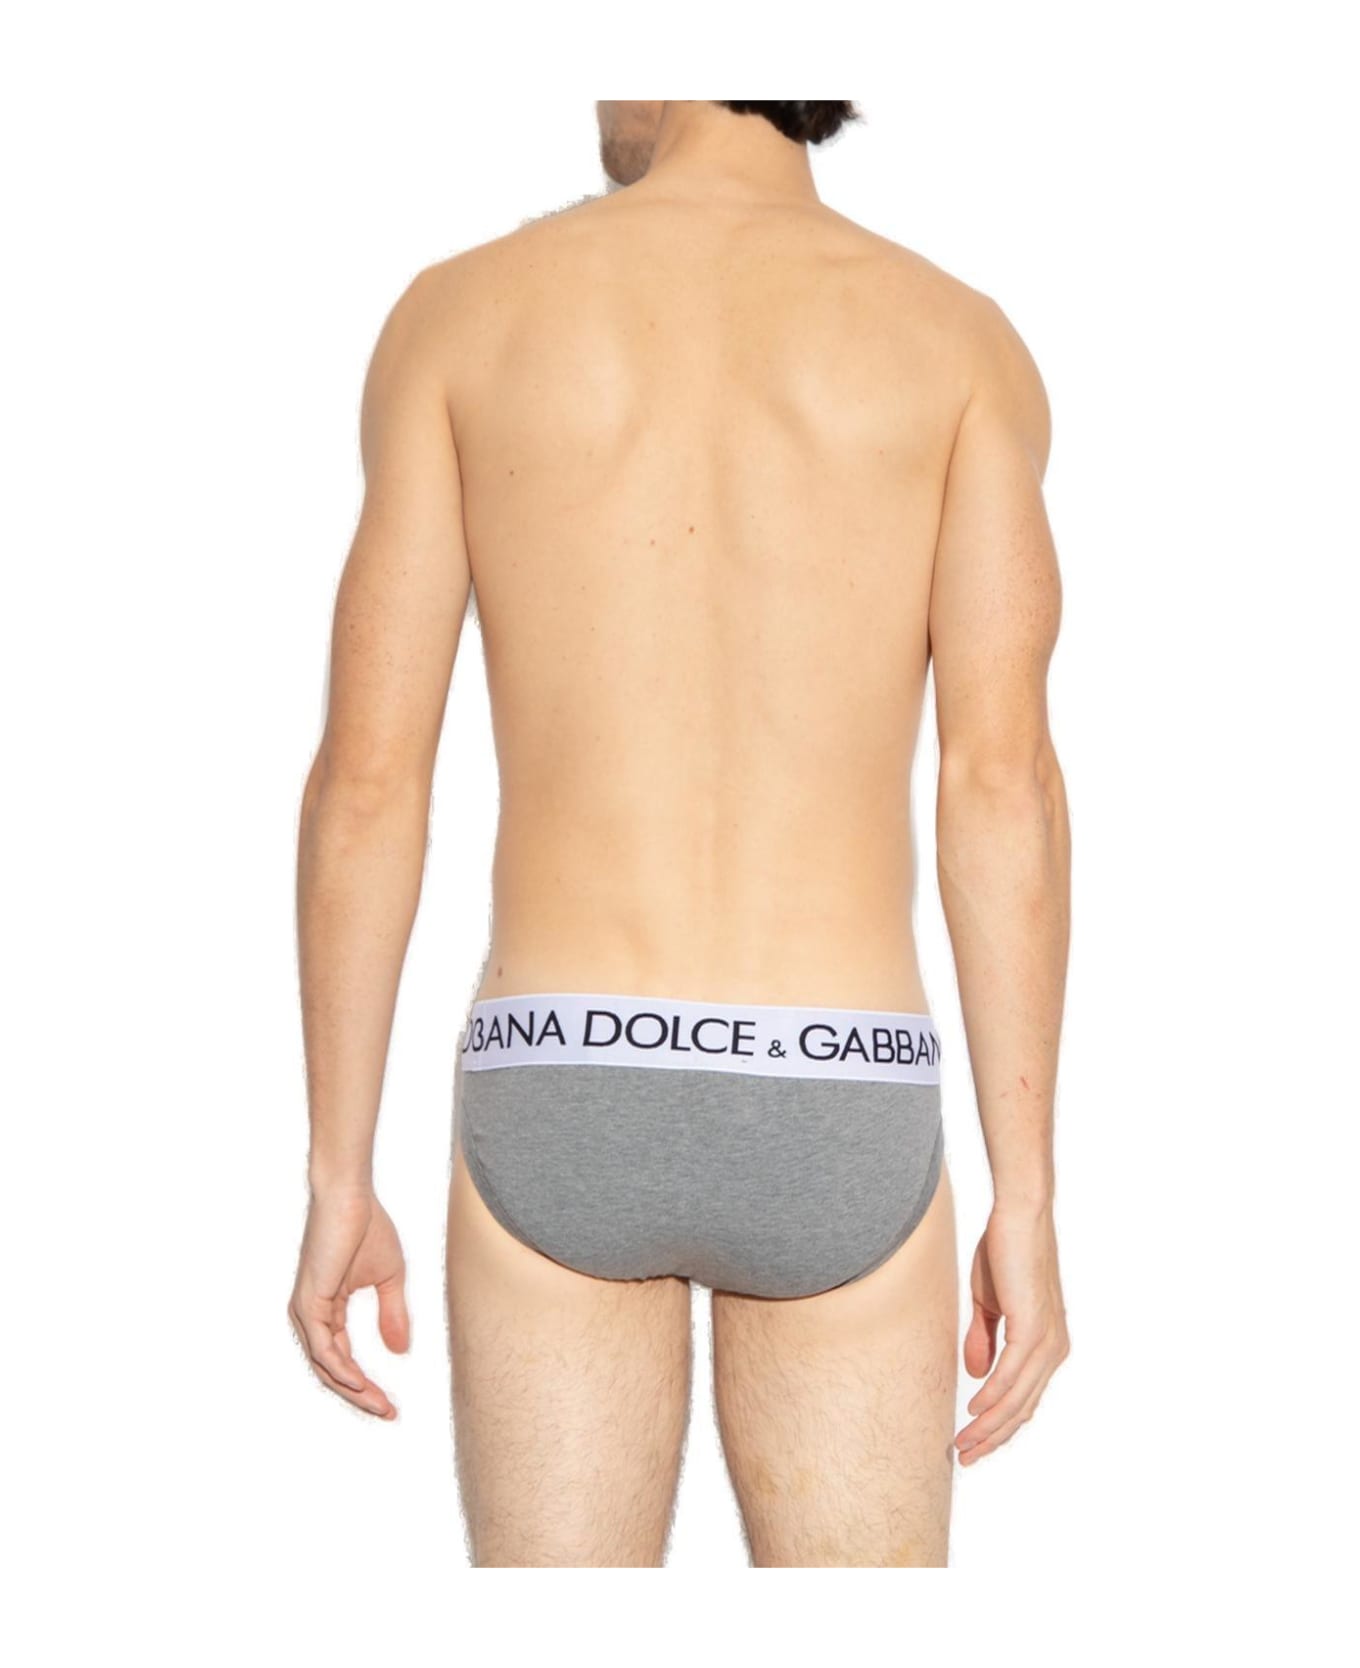 Dolce & Gabbana Two Way Stretched Mid-rise Briefs - MELANGE GREY